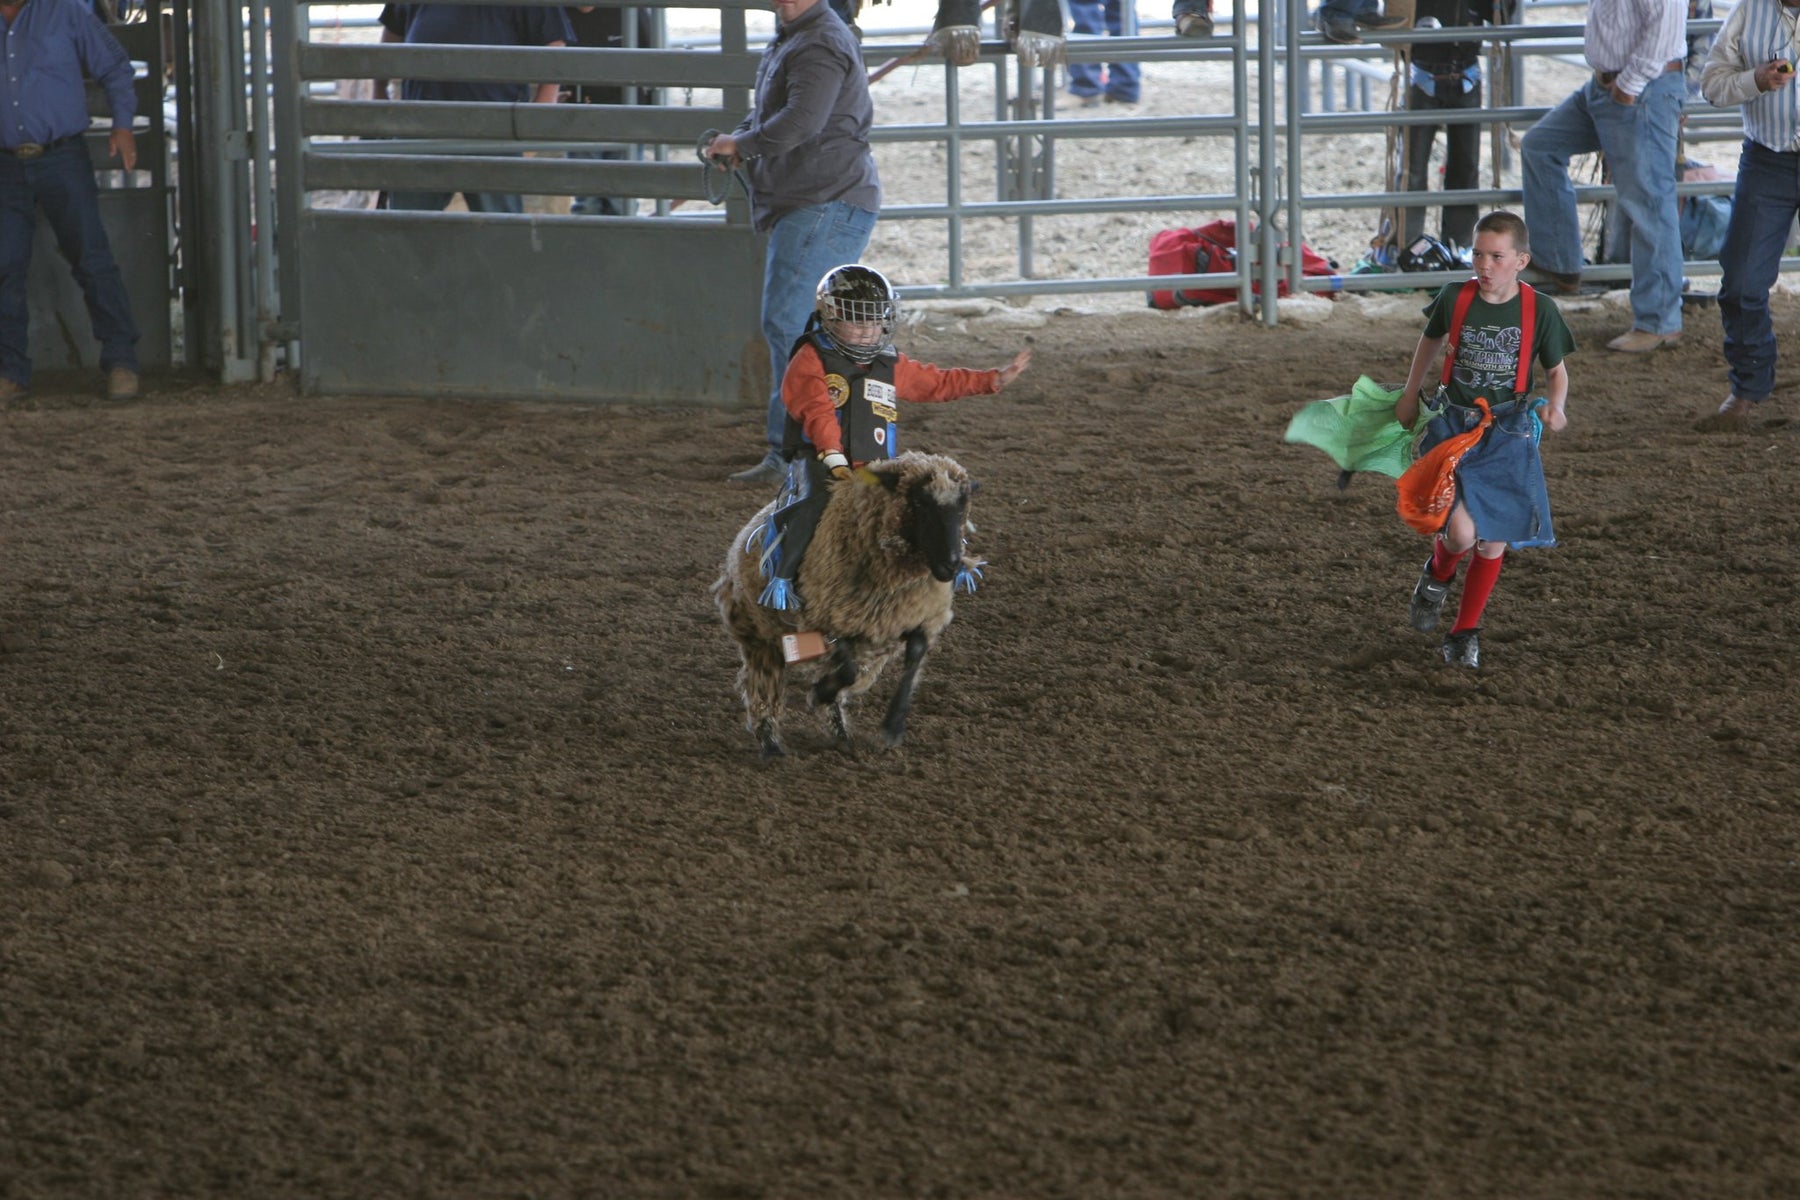 Mutton Bustin: A Growing Sport for the Youth